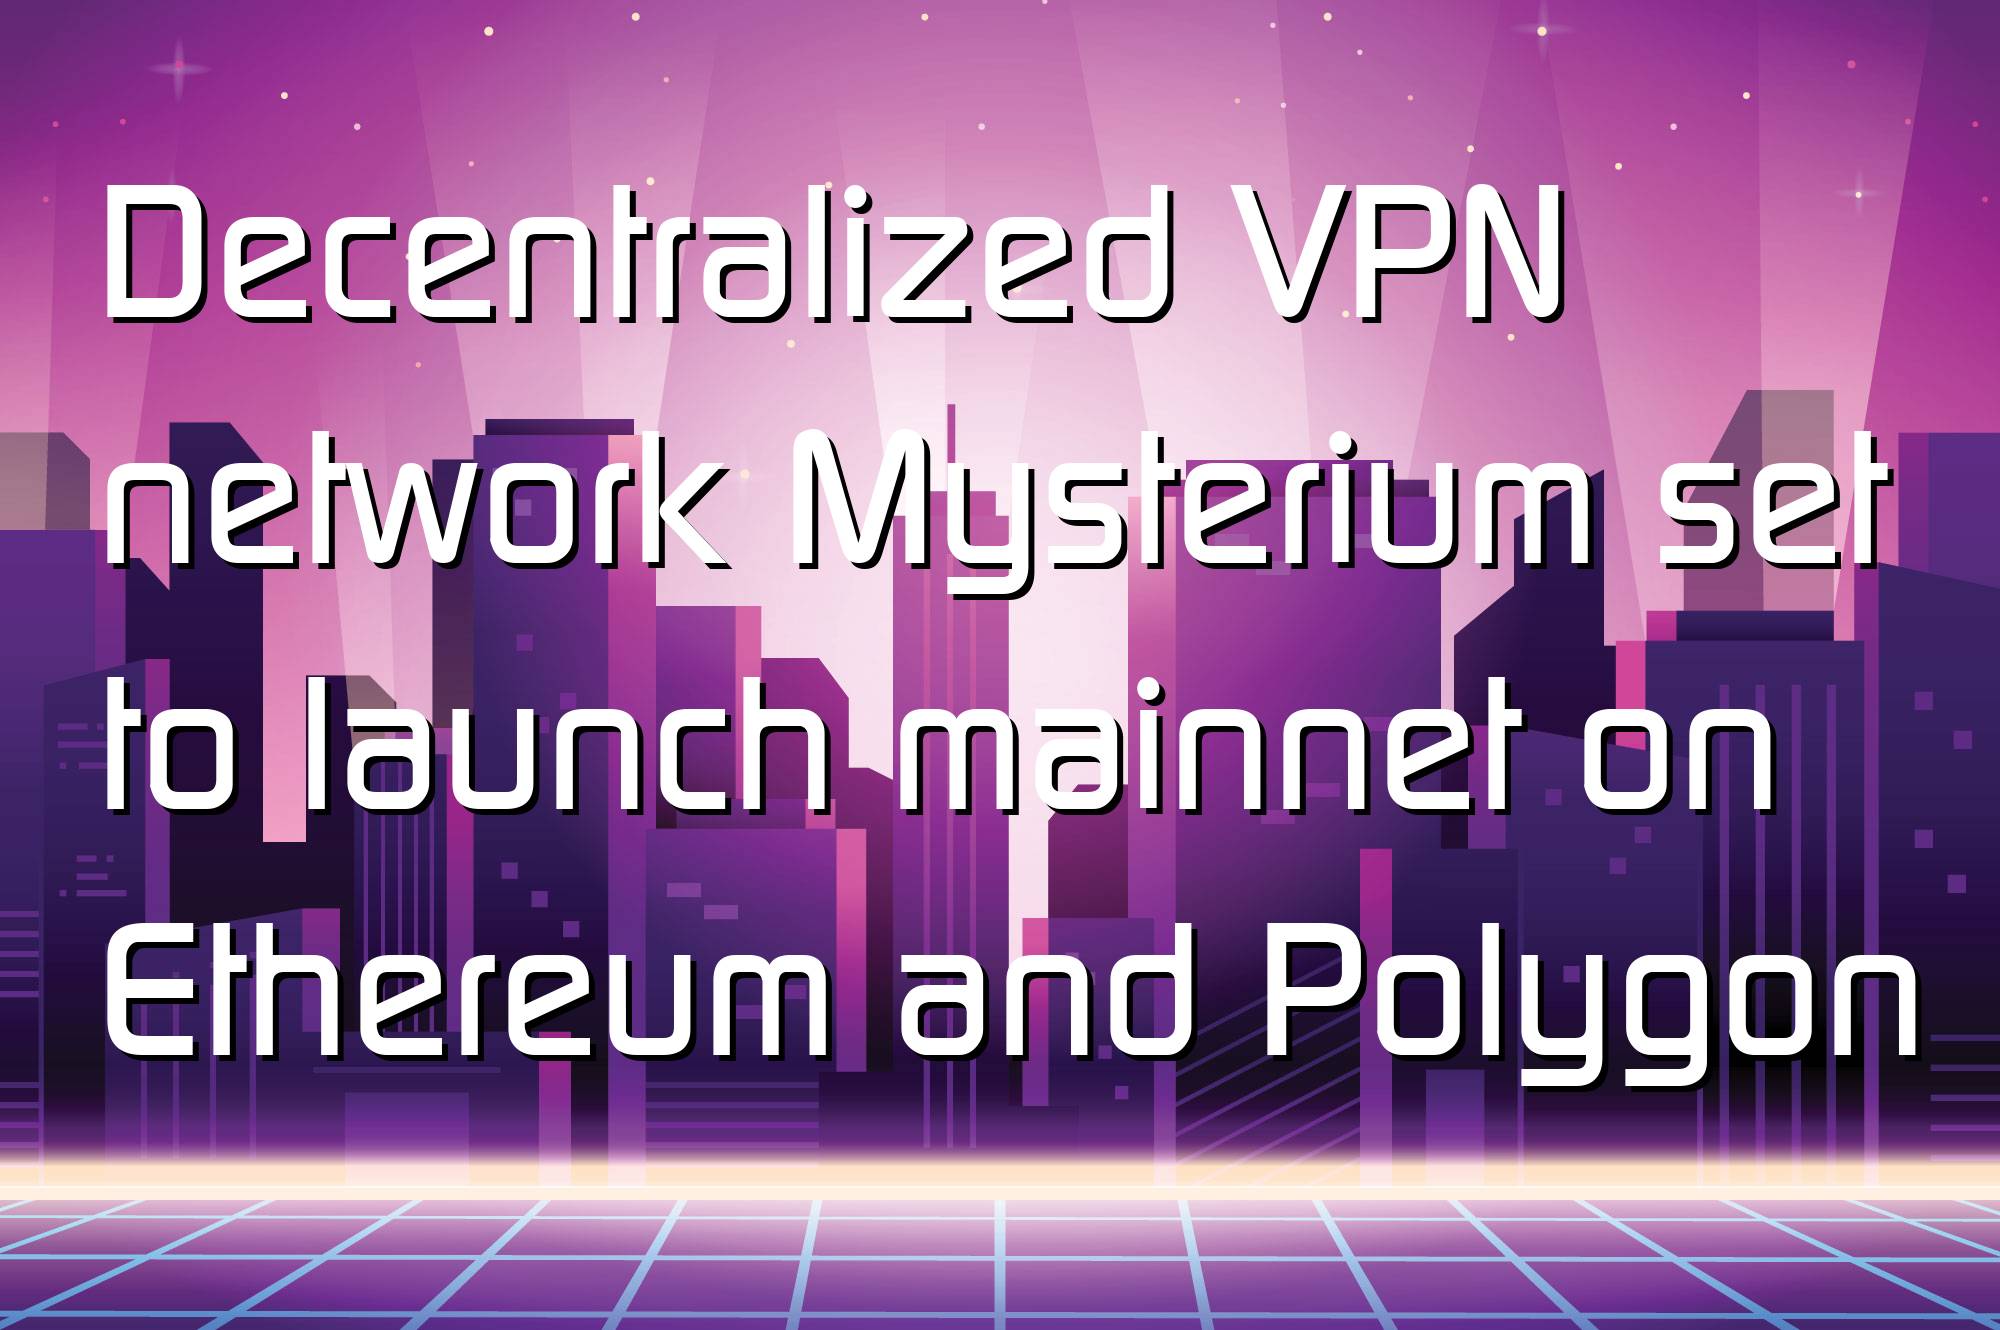 @$57393: Decentralized VPN network Mysterium set to launch mainnet on Ethereum and Polygon